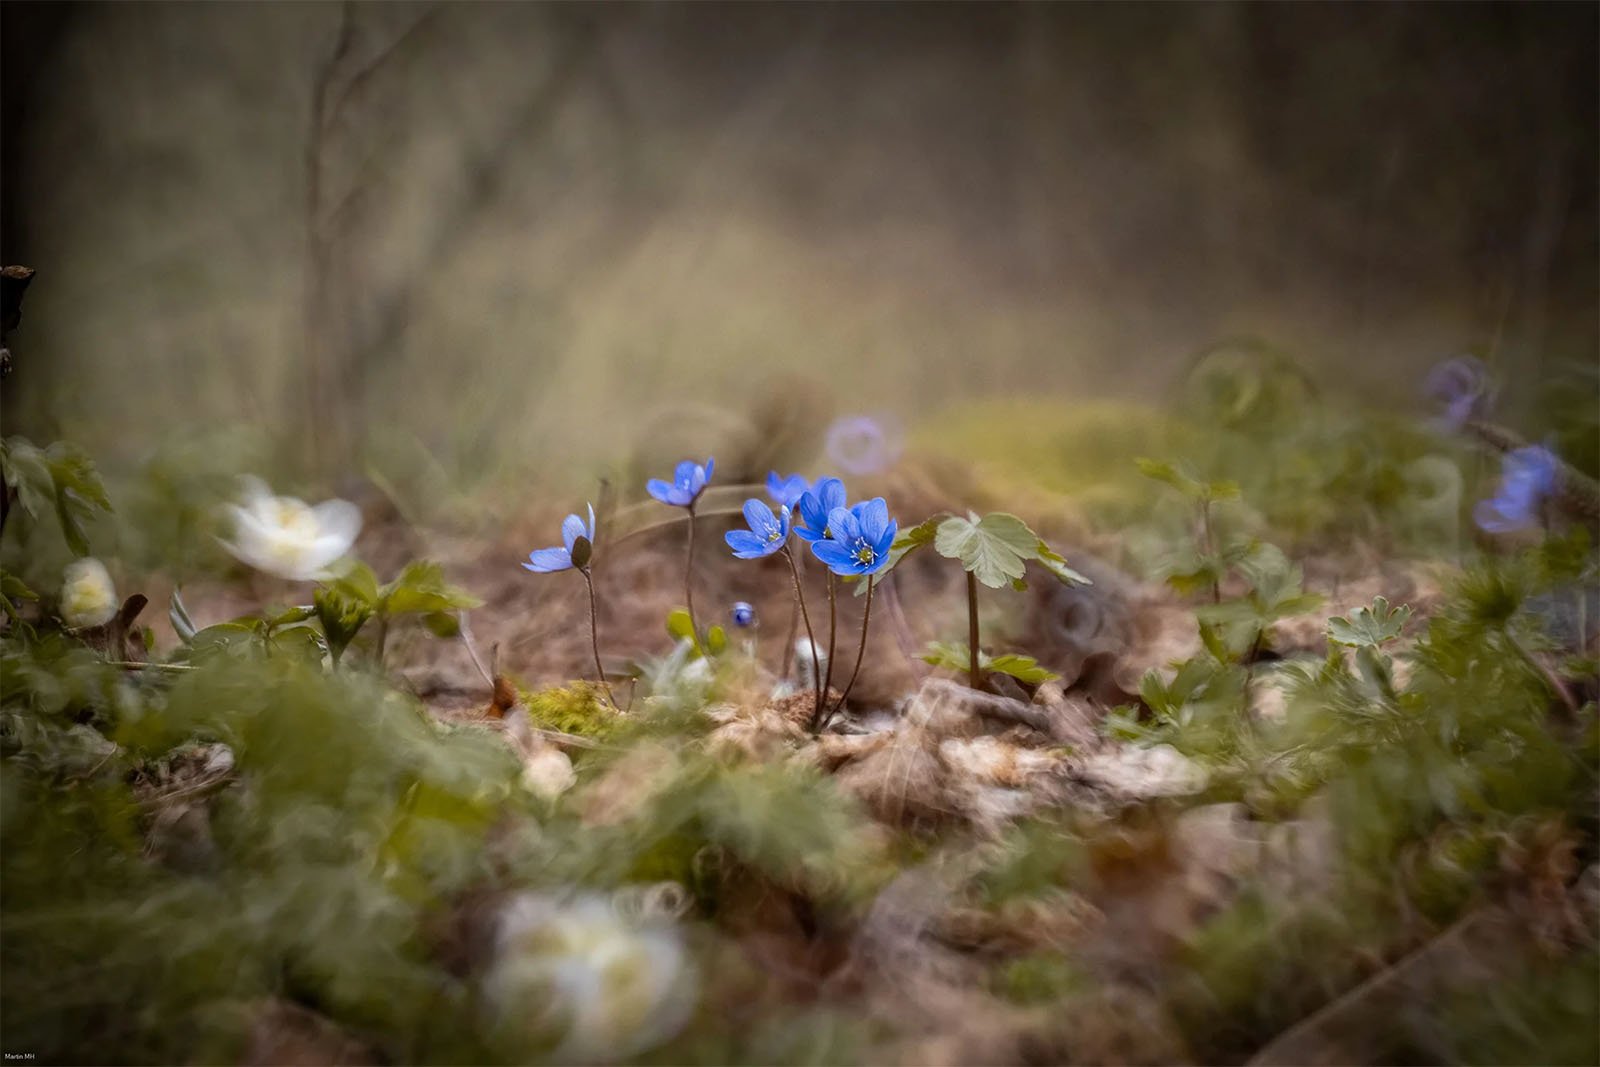 Close-up of a small cluster of delicate blue flowers growing on the forest floor, surrounded by green leaves and blurred foliage. The background is softly out of focus, giving a serene and dreamy atmosphere to the scene.